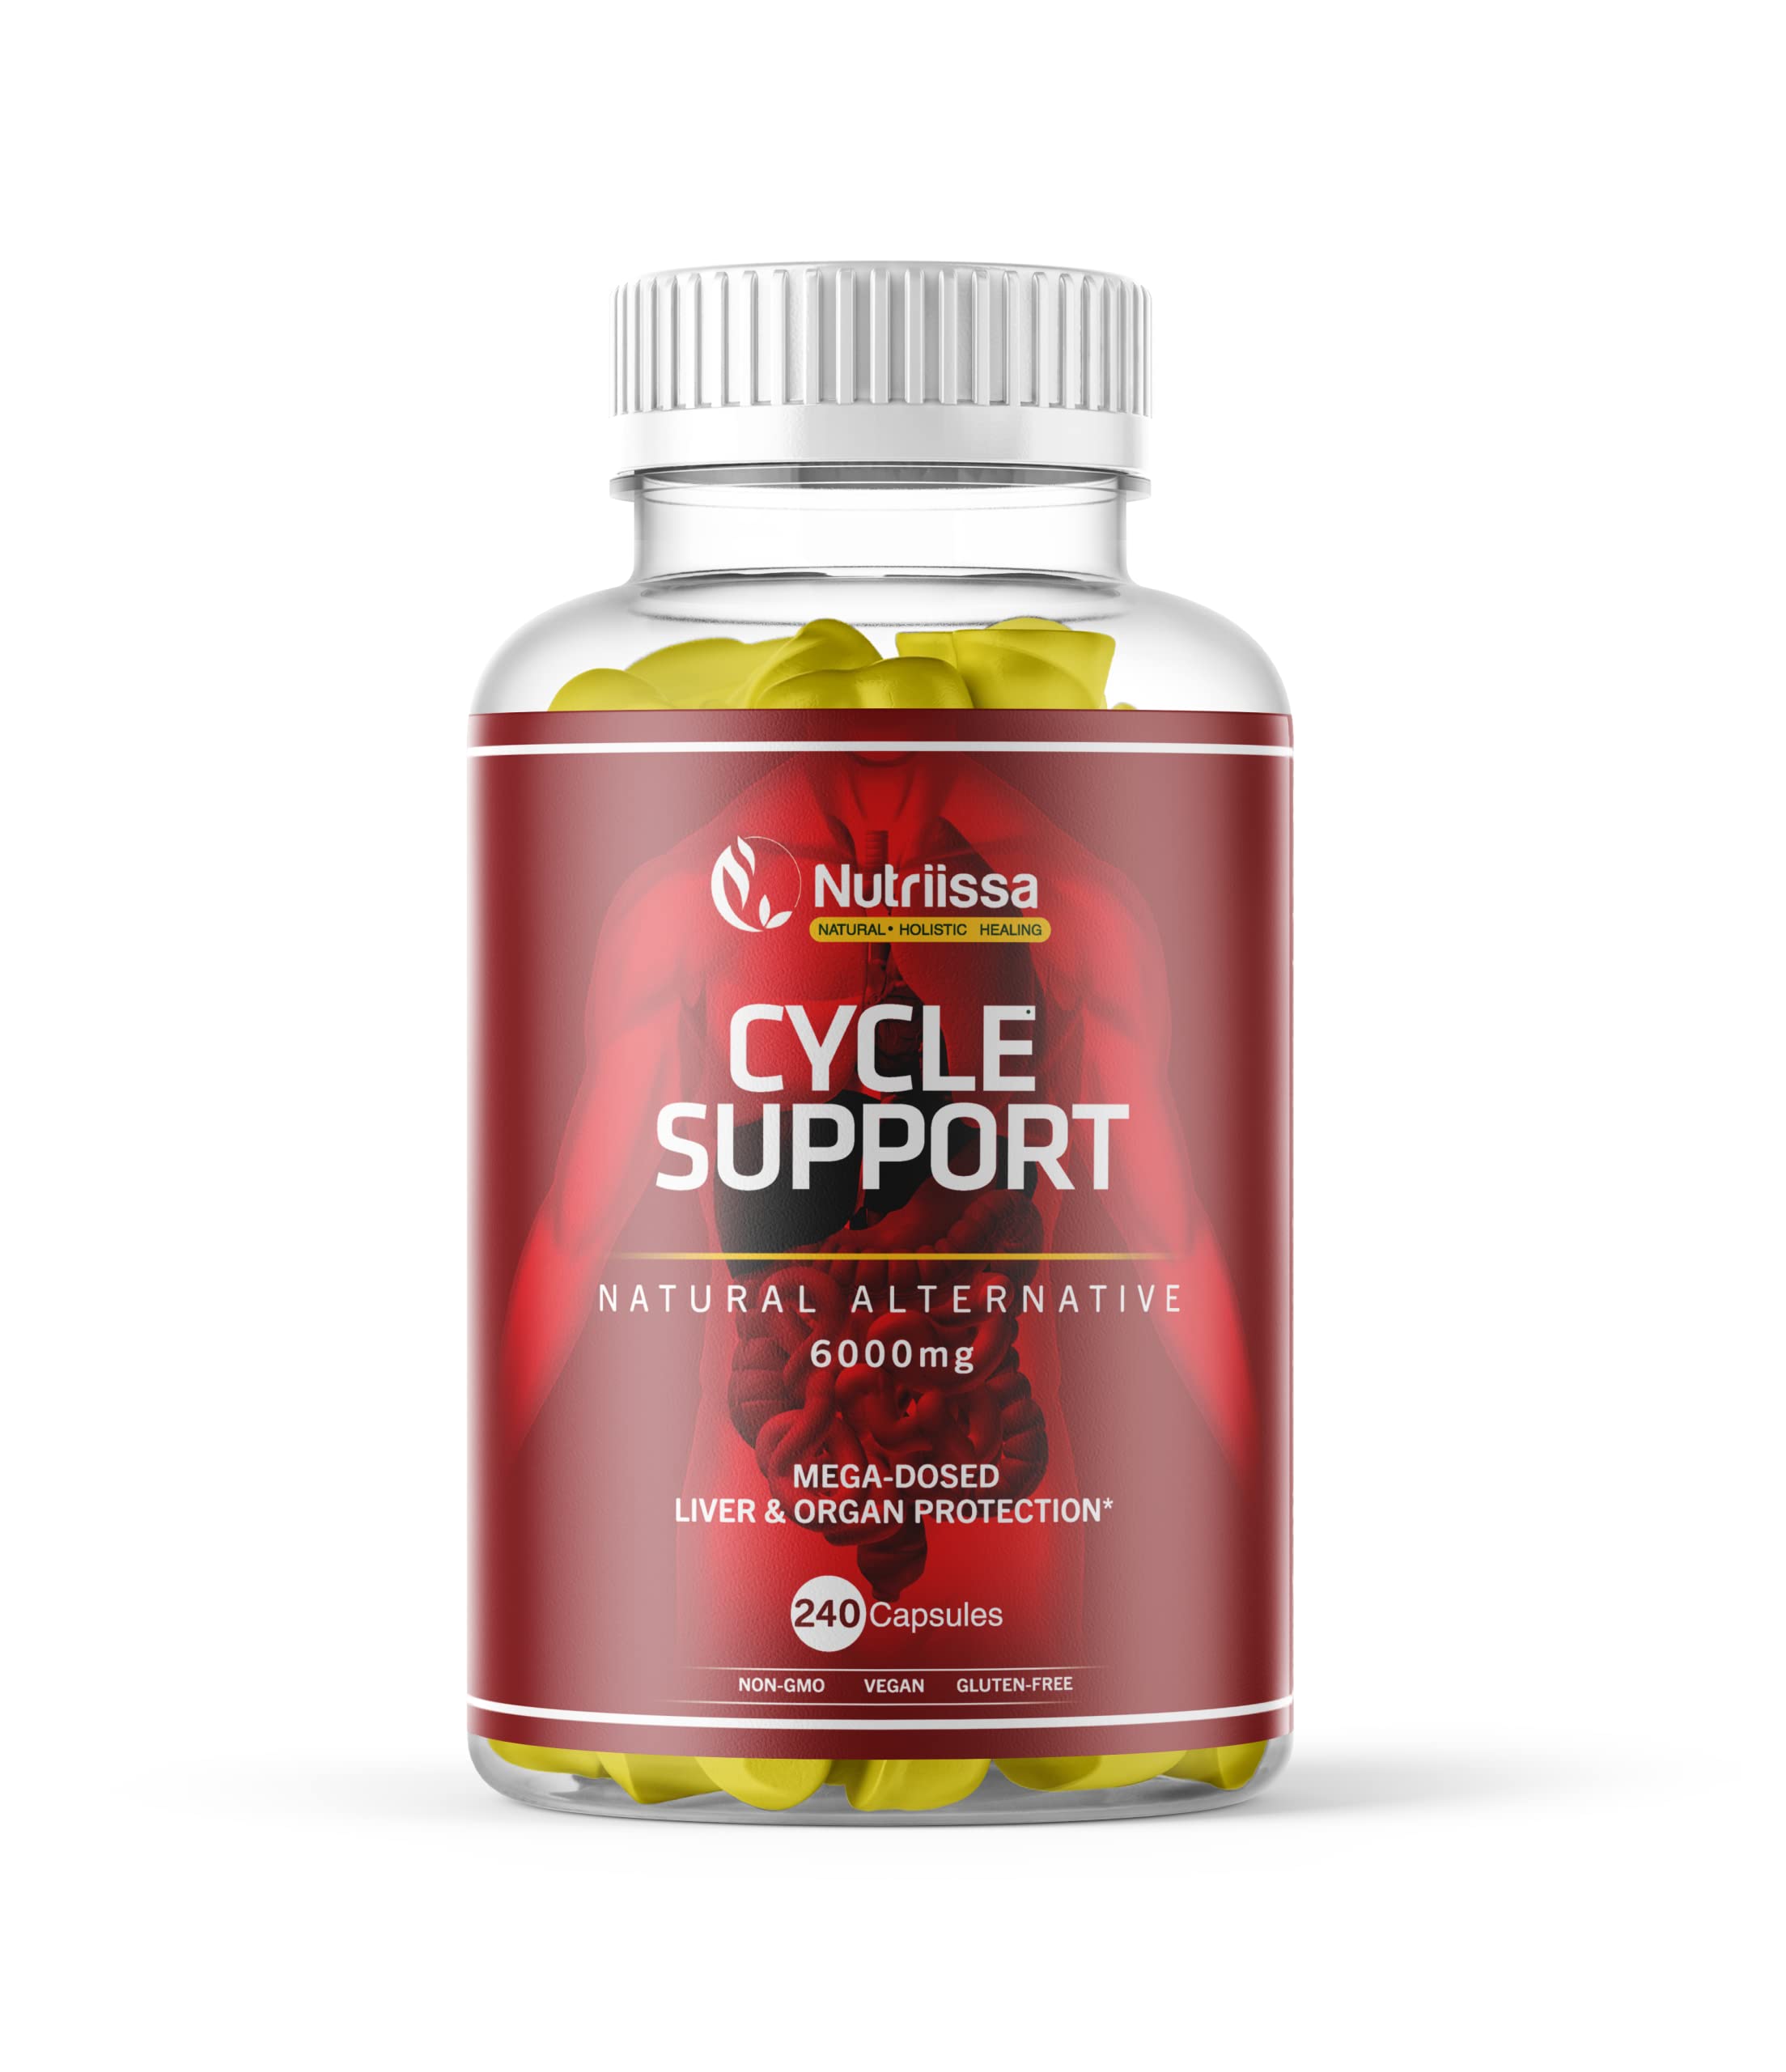 Nutriissa Cycle Support Liver & Organ Defender Pills - 240 Capsules